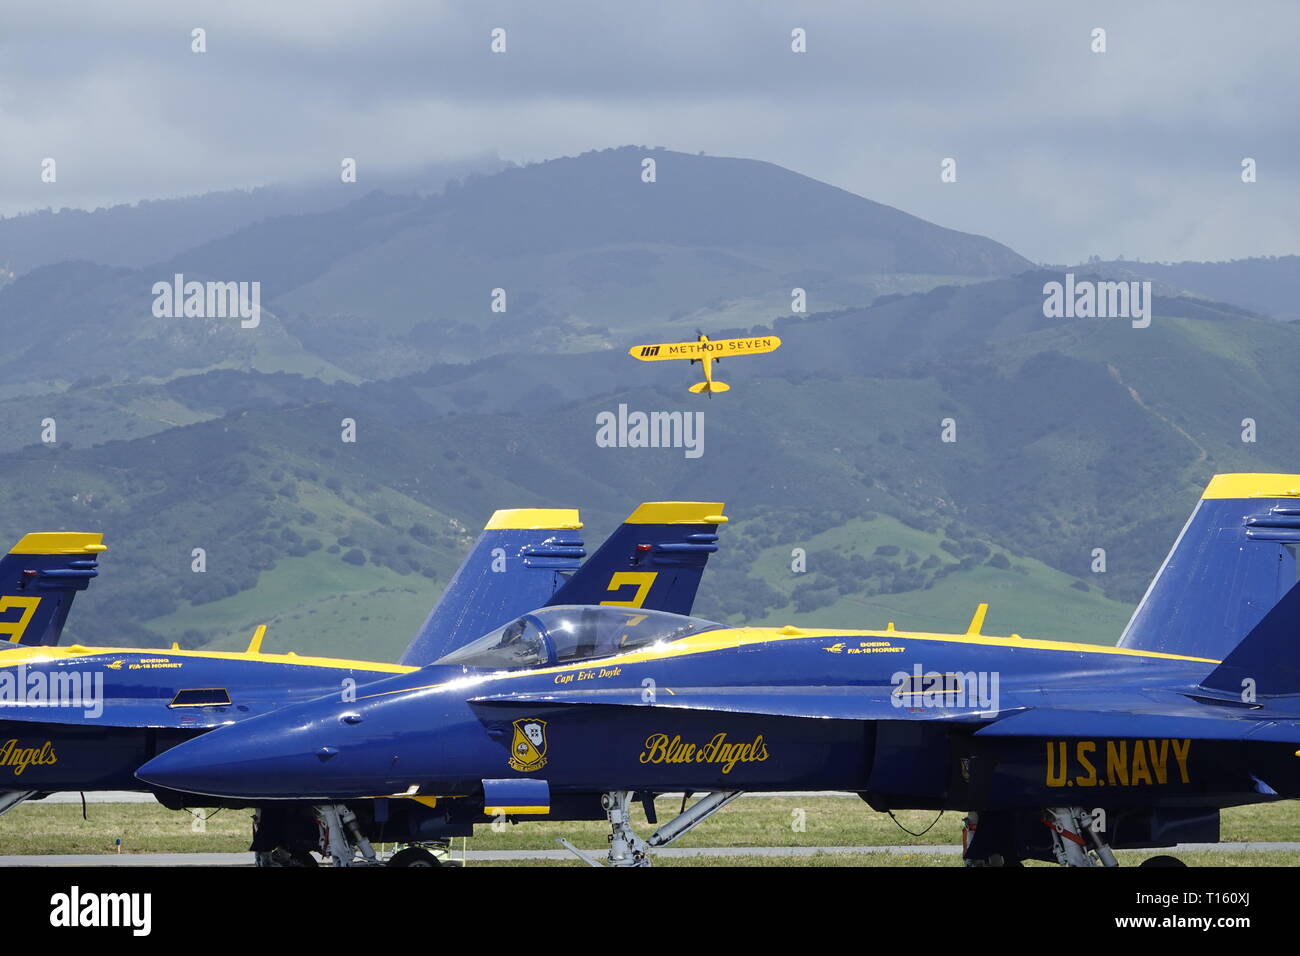 California, USA. 23rd Mar, 2019. 23rd March, 2019   Salinas, California, USA      Scvenes from the annual  Salinas Air-Show, featuring the US Navy 'Blue Angels' arobatic team: here Eric tucker in his 'Method seven' high wing maneouvers over the jets of the Blue Angels Credit: Motofoto/Alamy Live News Stock Photo